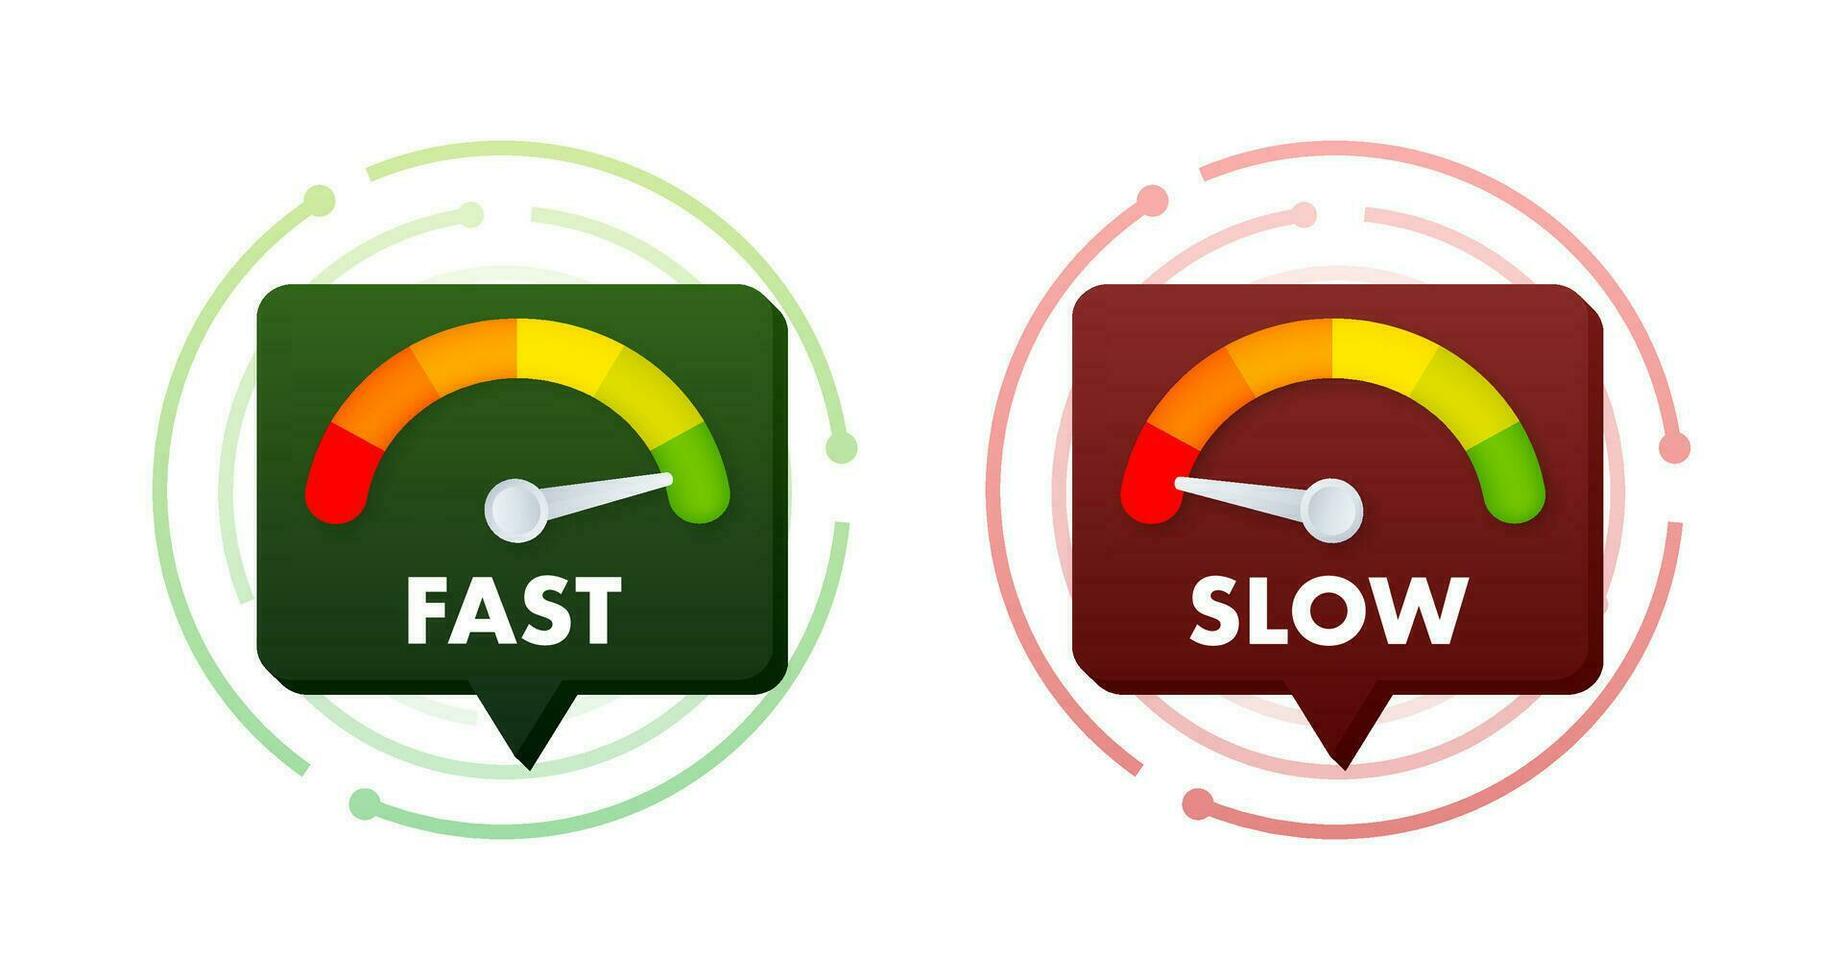 Network Speed Test Indicators Showing Fast and Slow Speeds, Vector Illustration for Internet Connection and Performance Analysis